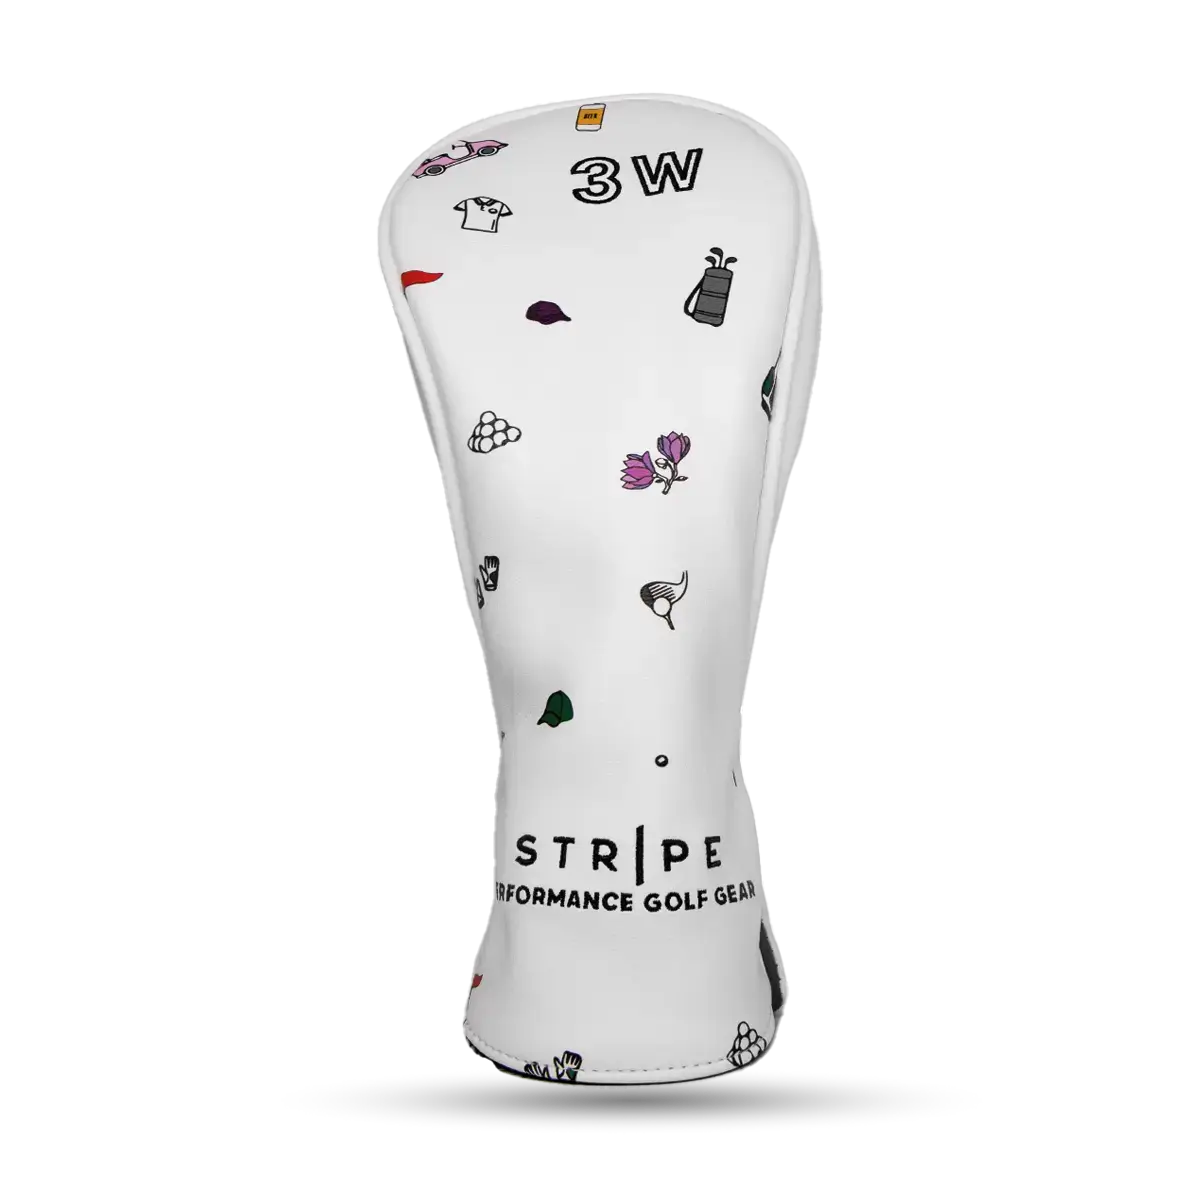 Headcover for fairway wood in white leather with pattern print.